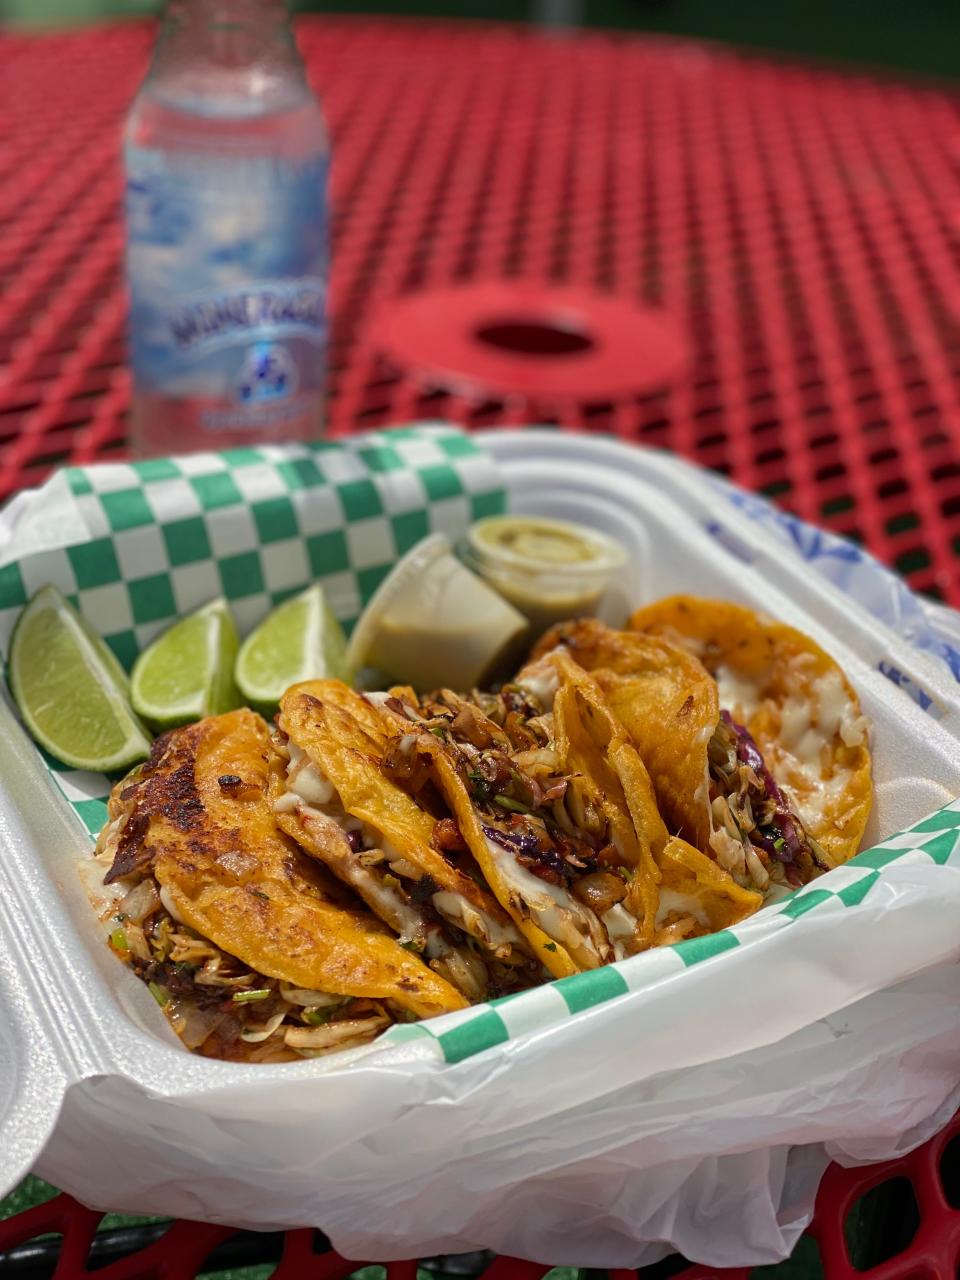 Tacos at the TACOnganas food truck on Summer Avenue.